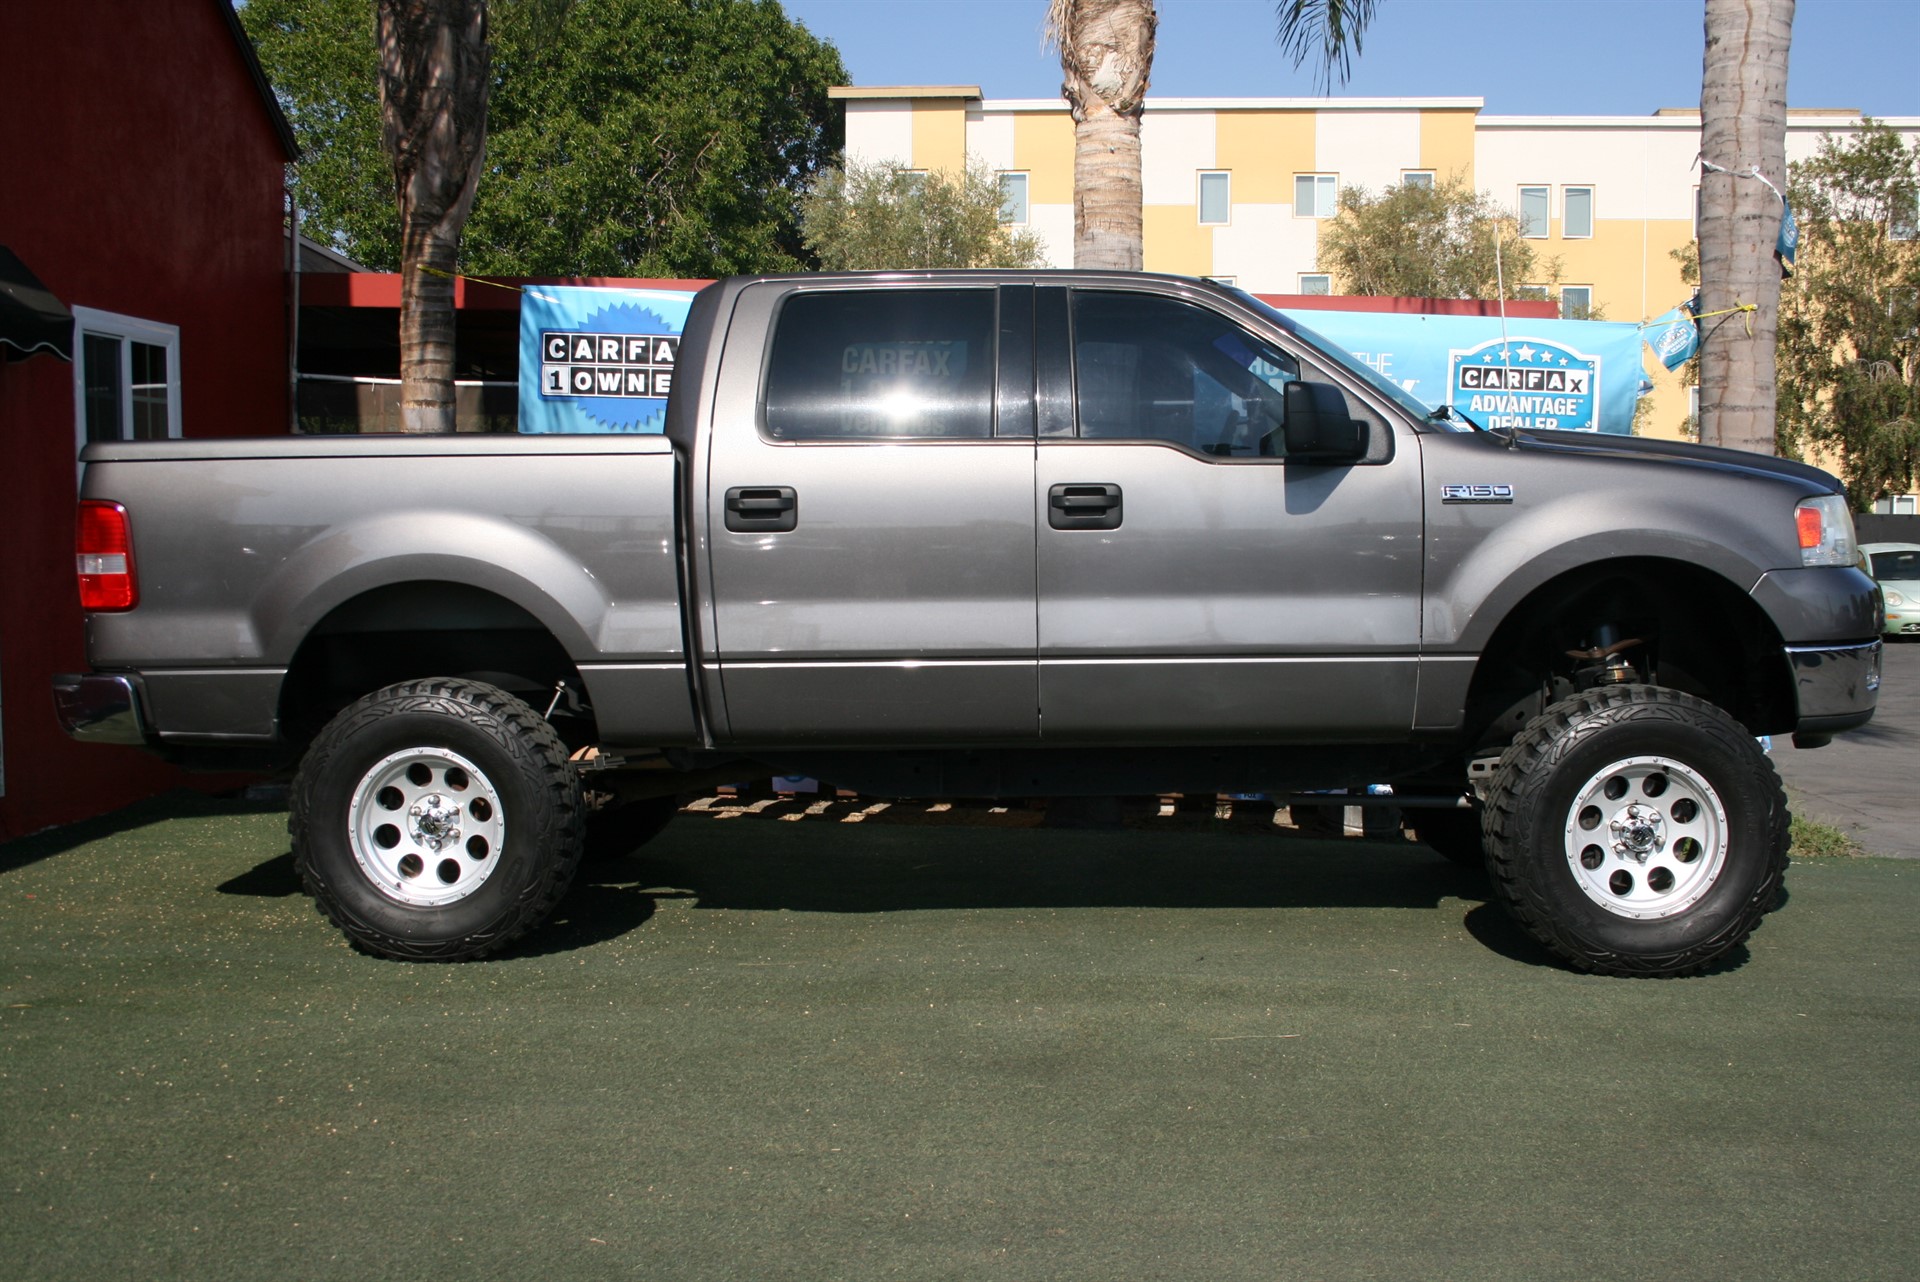 2004 Ford F-150 XLT- Lifted with huge wheels, fun to drive!